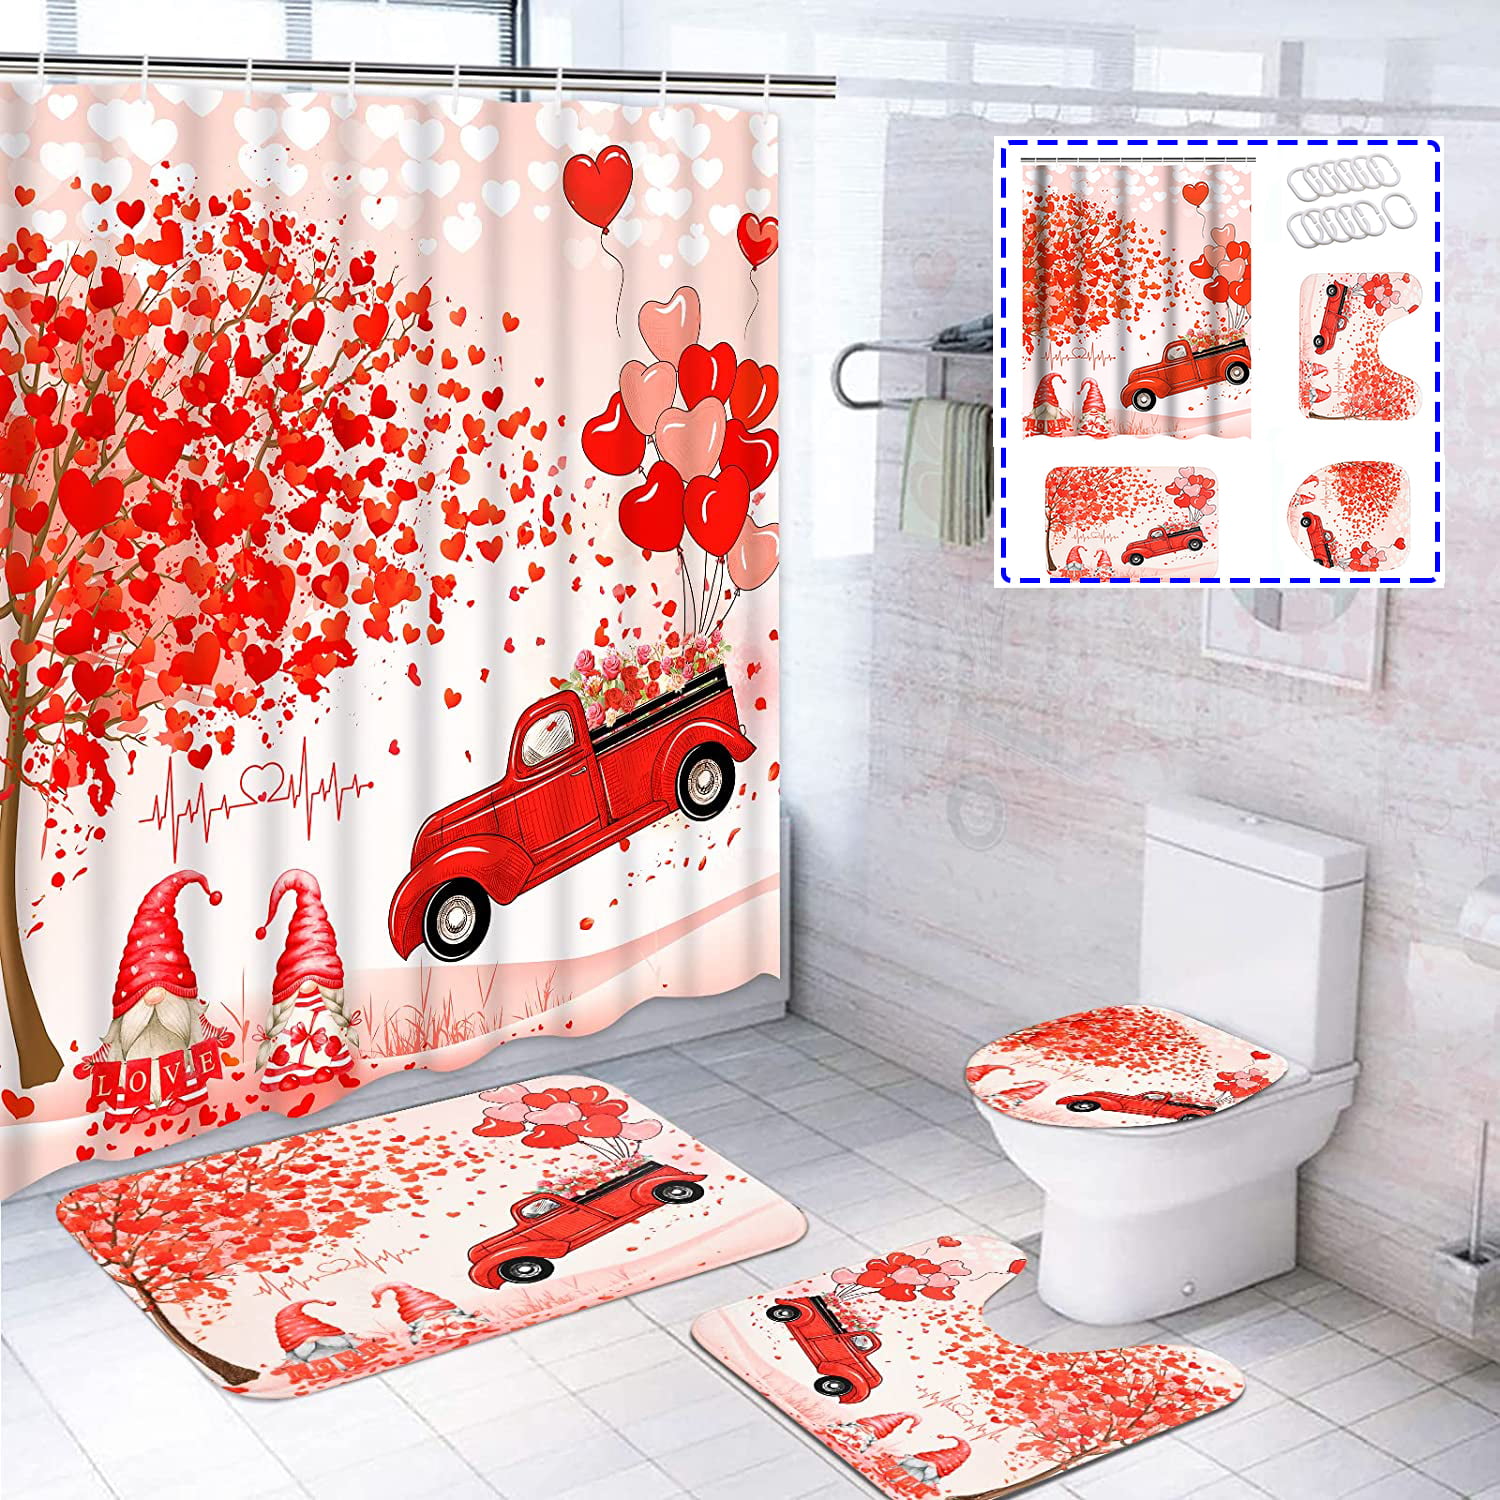 Details about   Traces of the spread of color art Shower Curtain Toilet Cover Rug Mat  Rug Set 